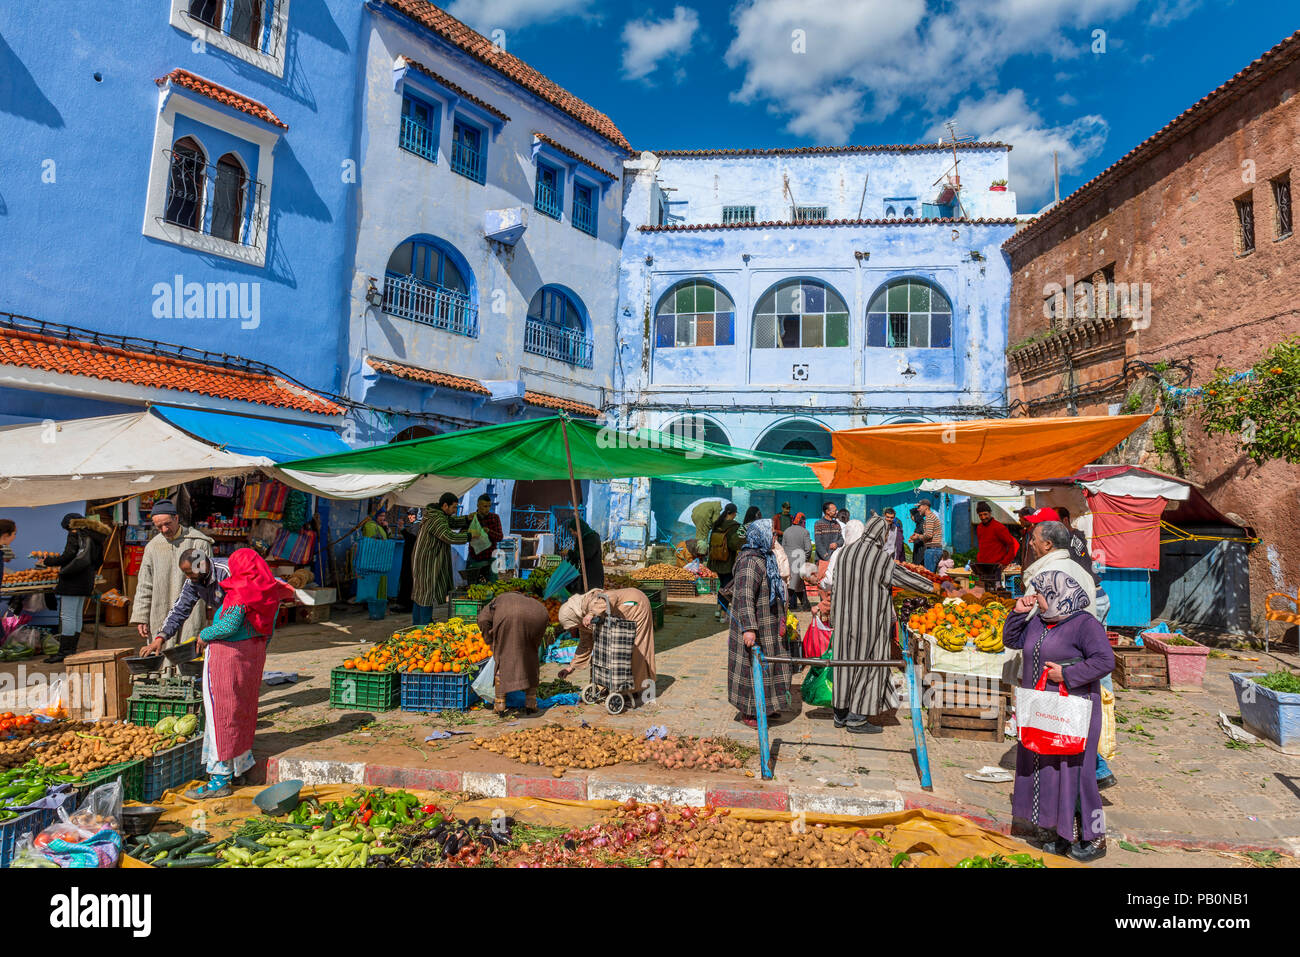 Locals buying vegetables, market in front of Blue Houses, Chefchaouen, Chaouen, Tangier-Tétouan, Kingdom of Morocco Stock Photo